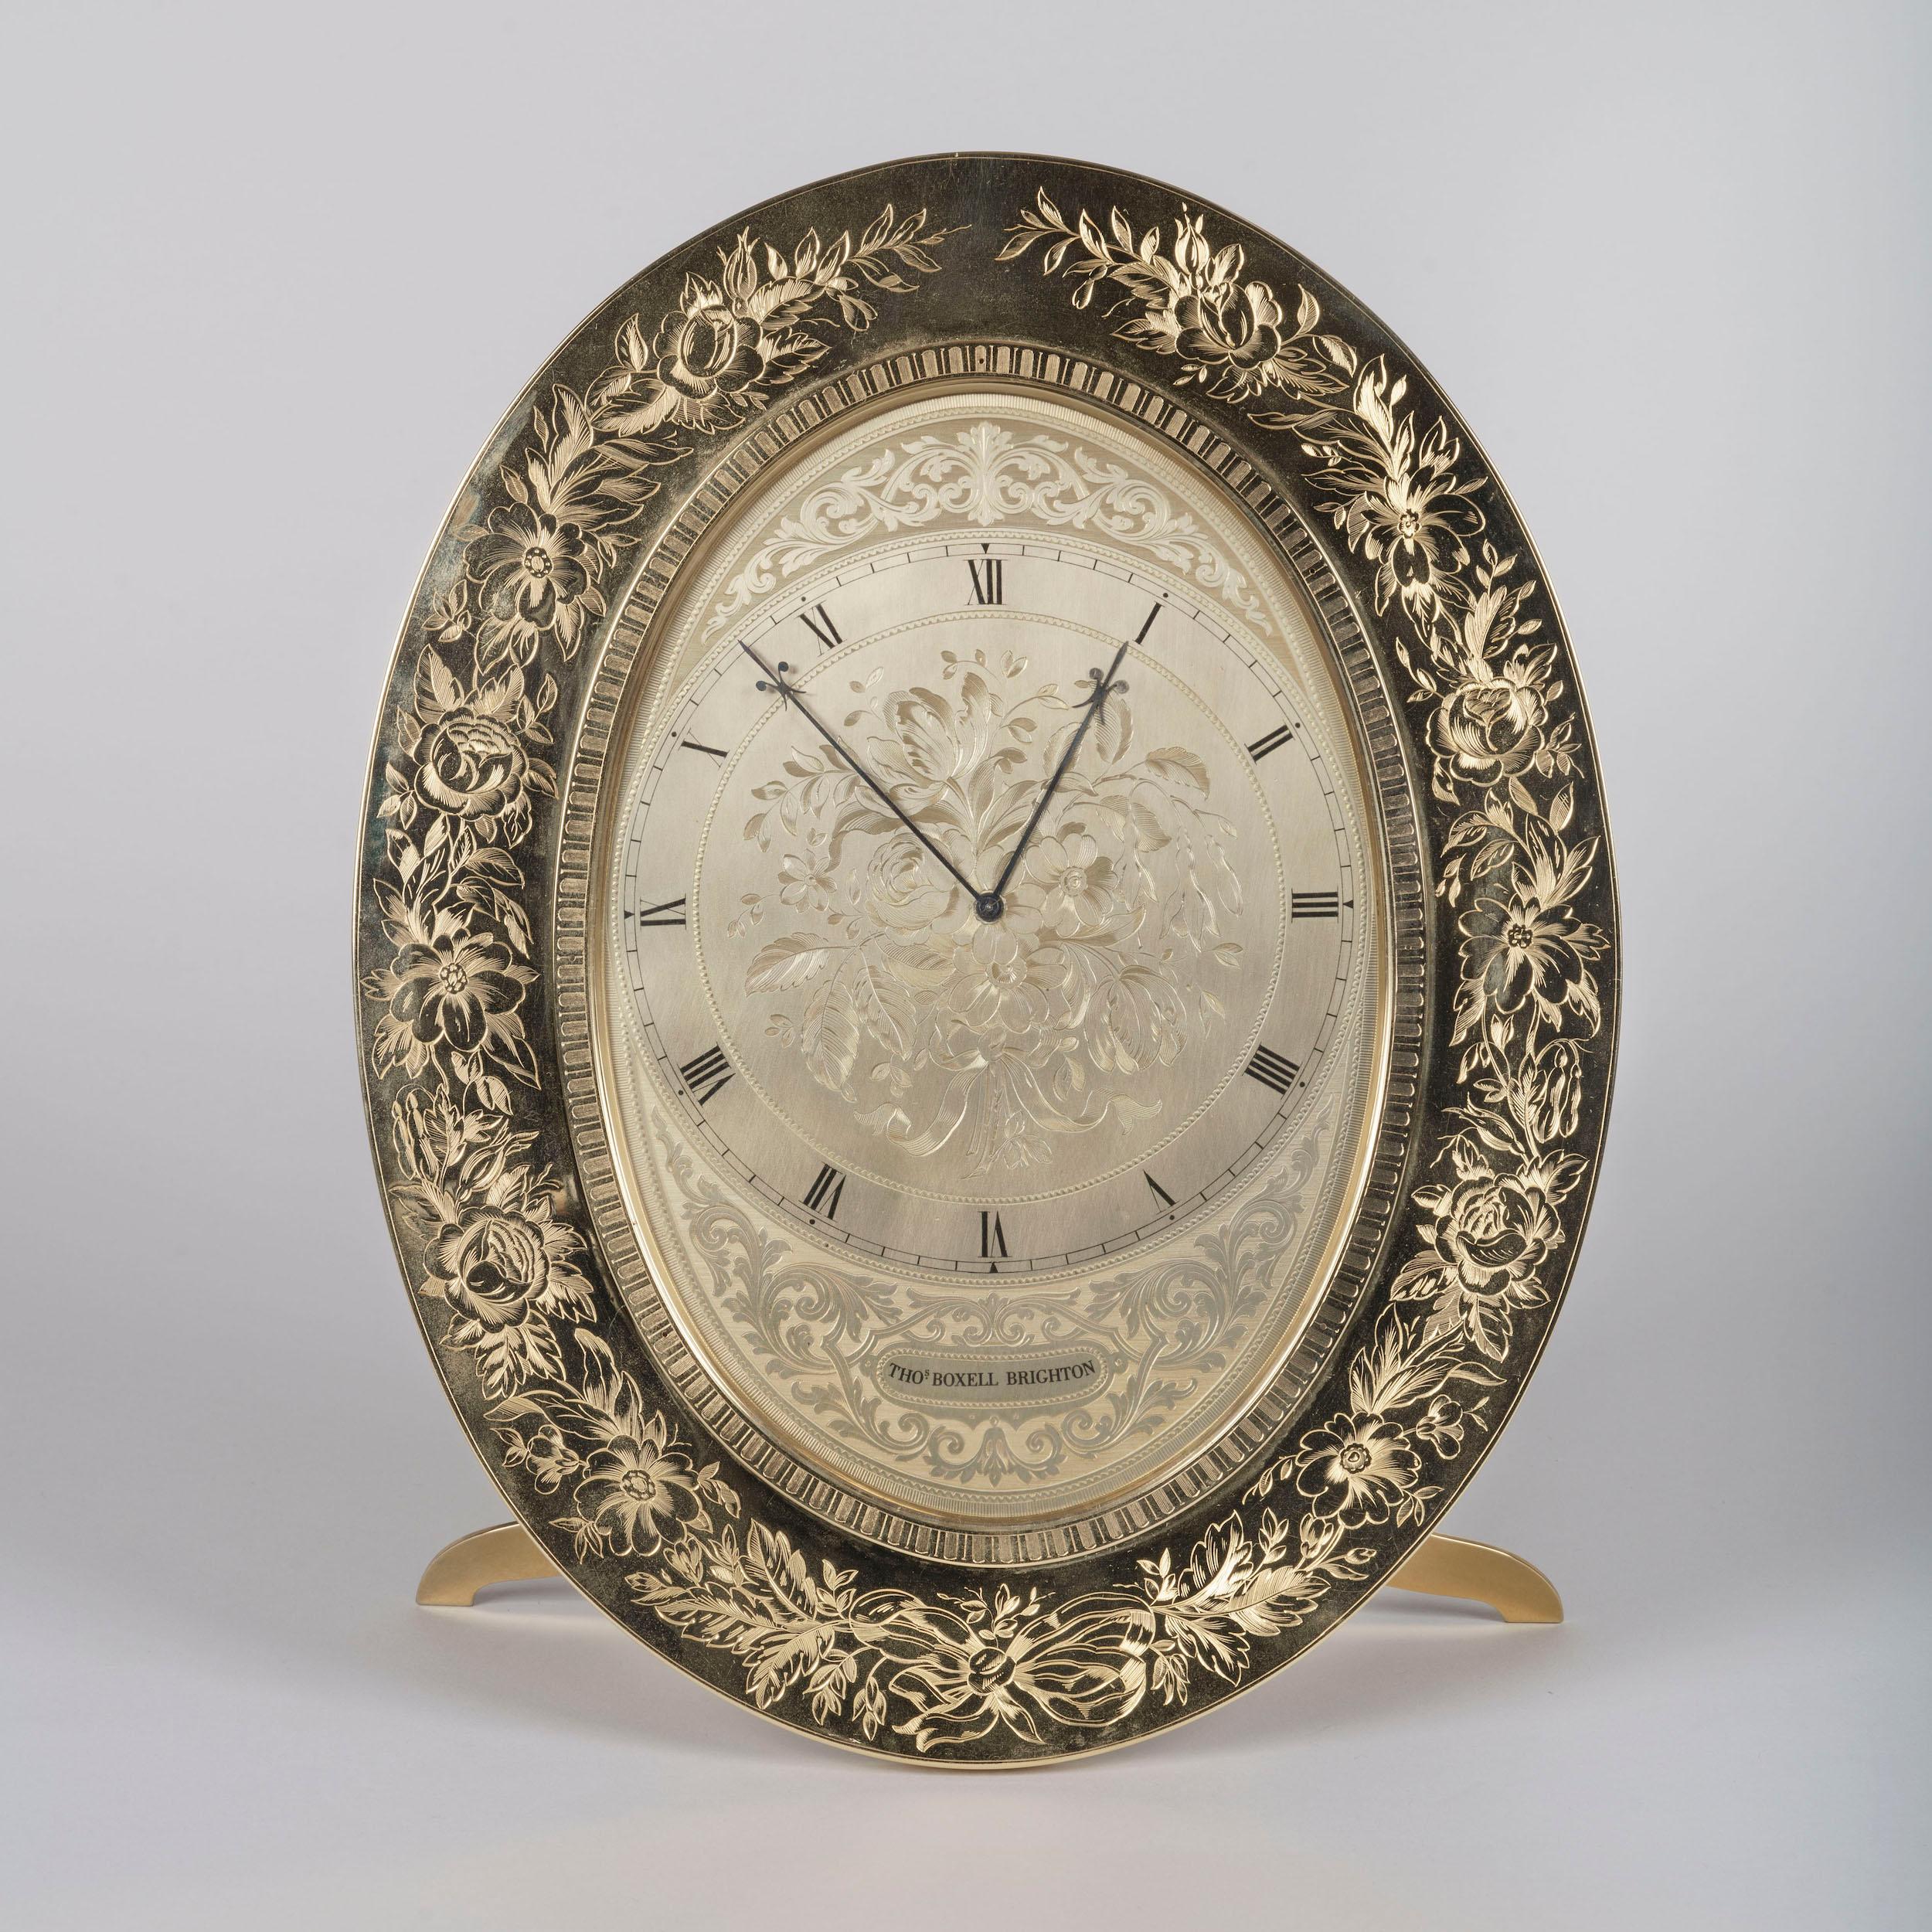 A large oval strut clock
By Thomas Cole

The case constructed from gilt brass and designed to be as thin as possible, finely engraved throughout, of substantial oval size, and supported by means of a fold-out foot, the outer frame with floral